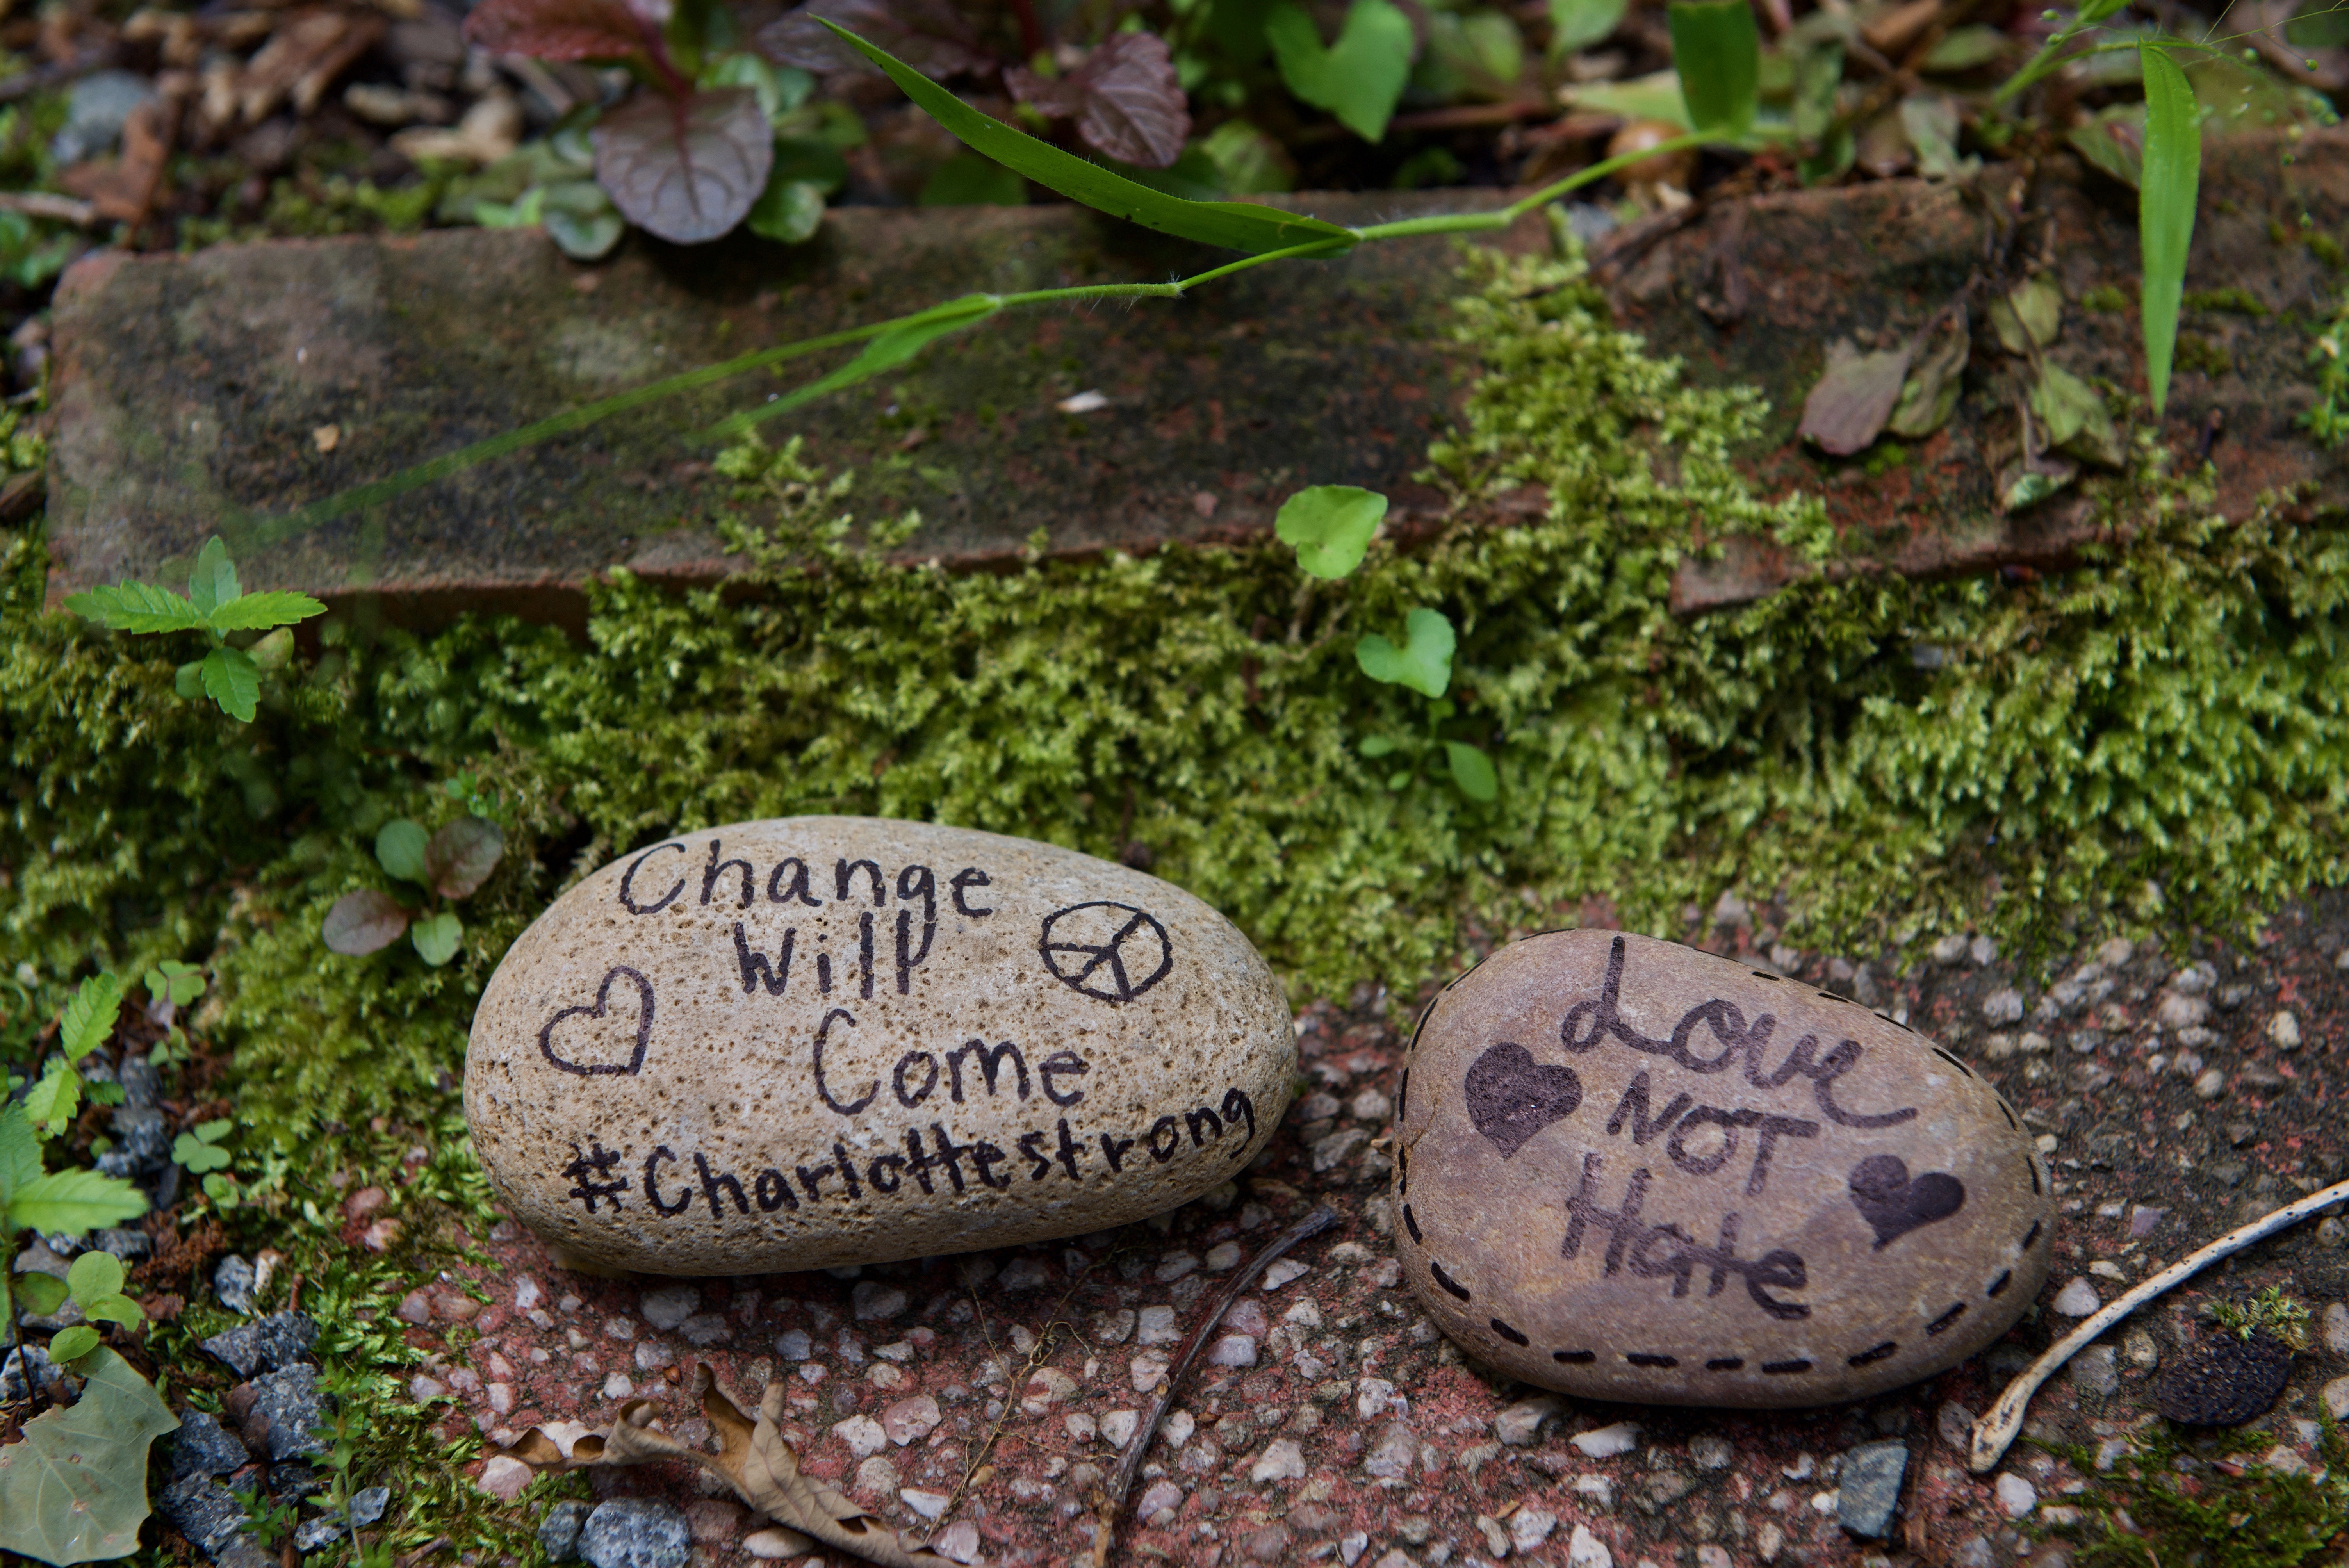 Stones with the messages Change Will Come #Charlotte strong and Love Not Hate